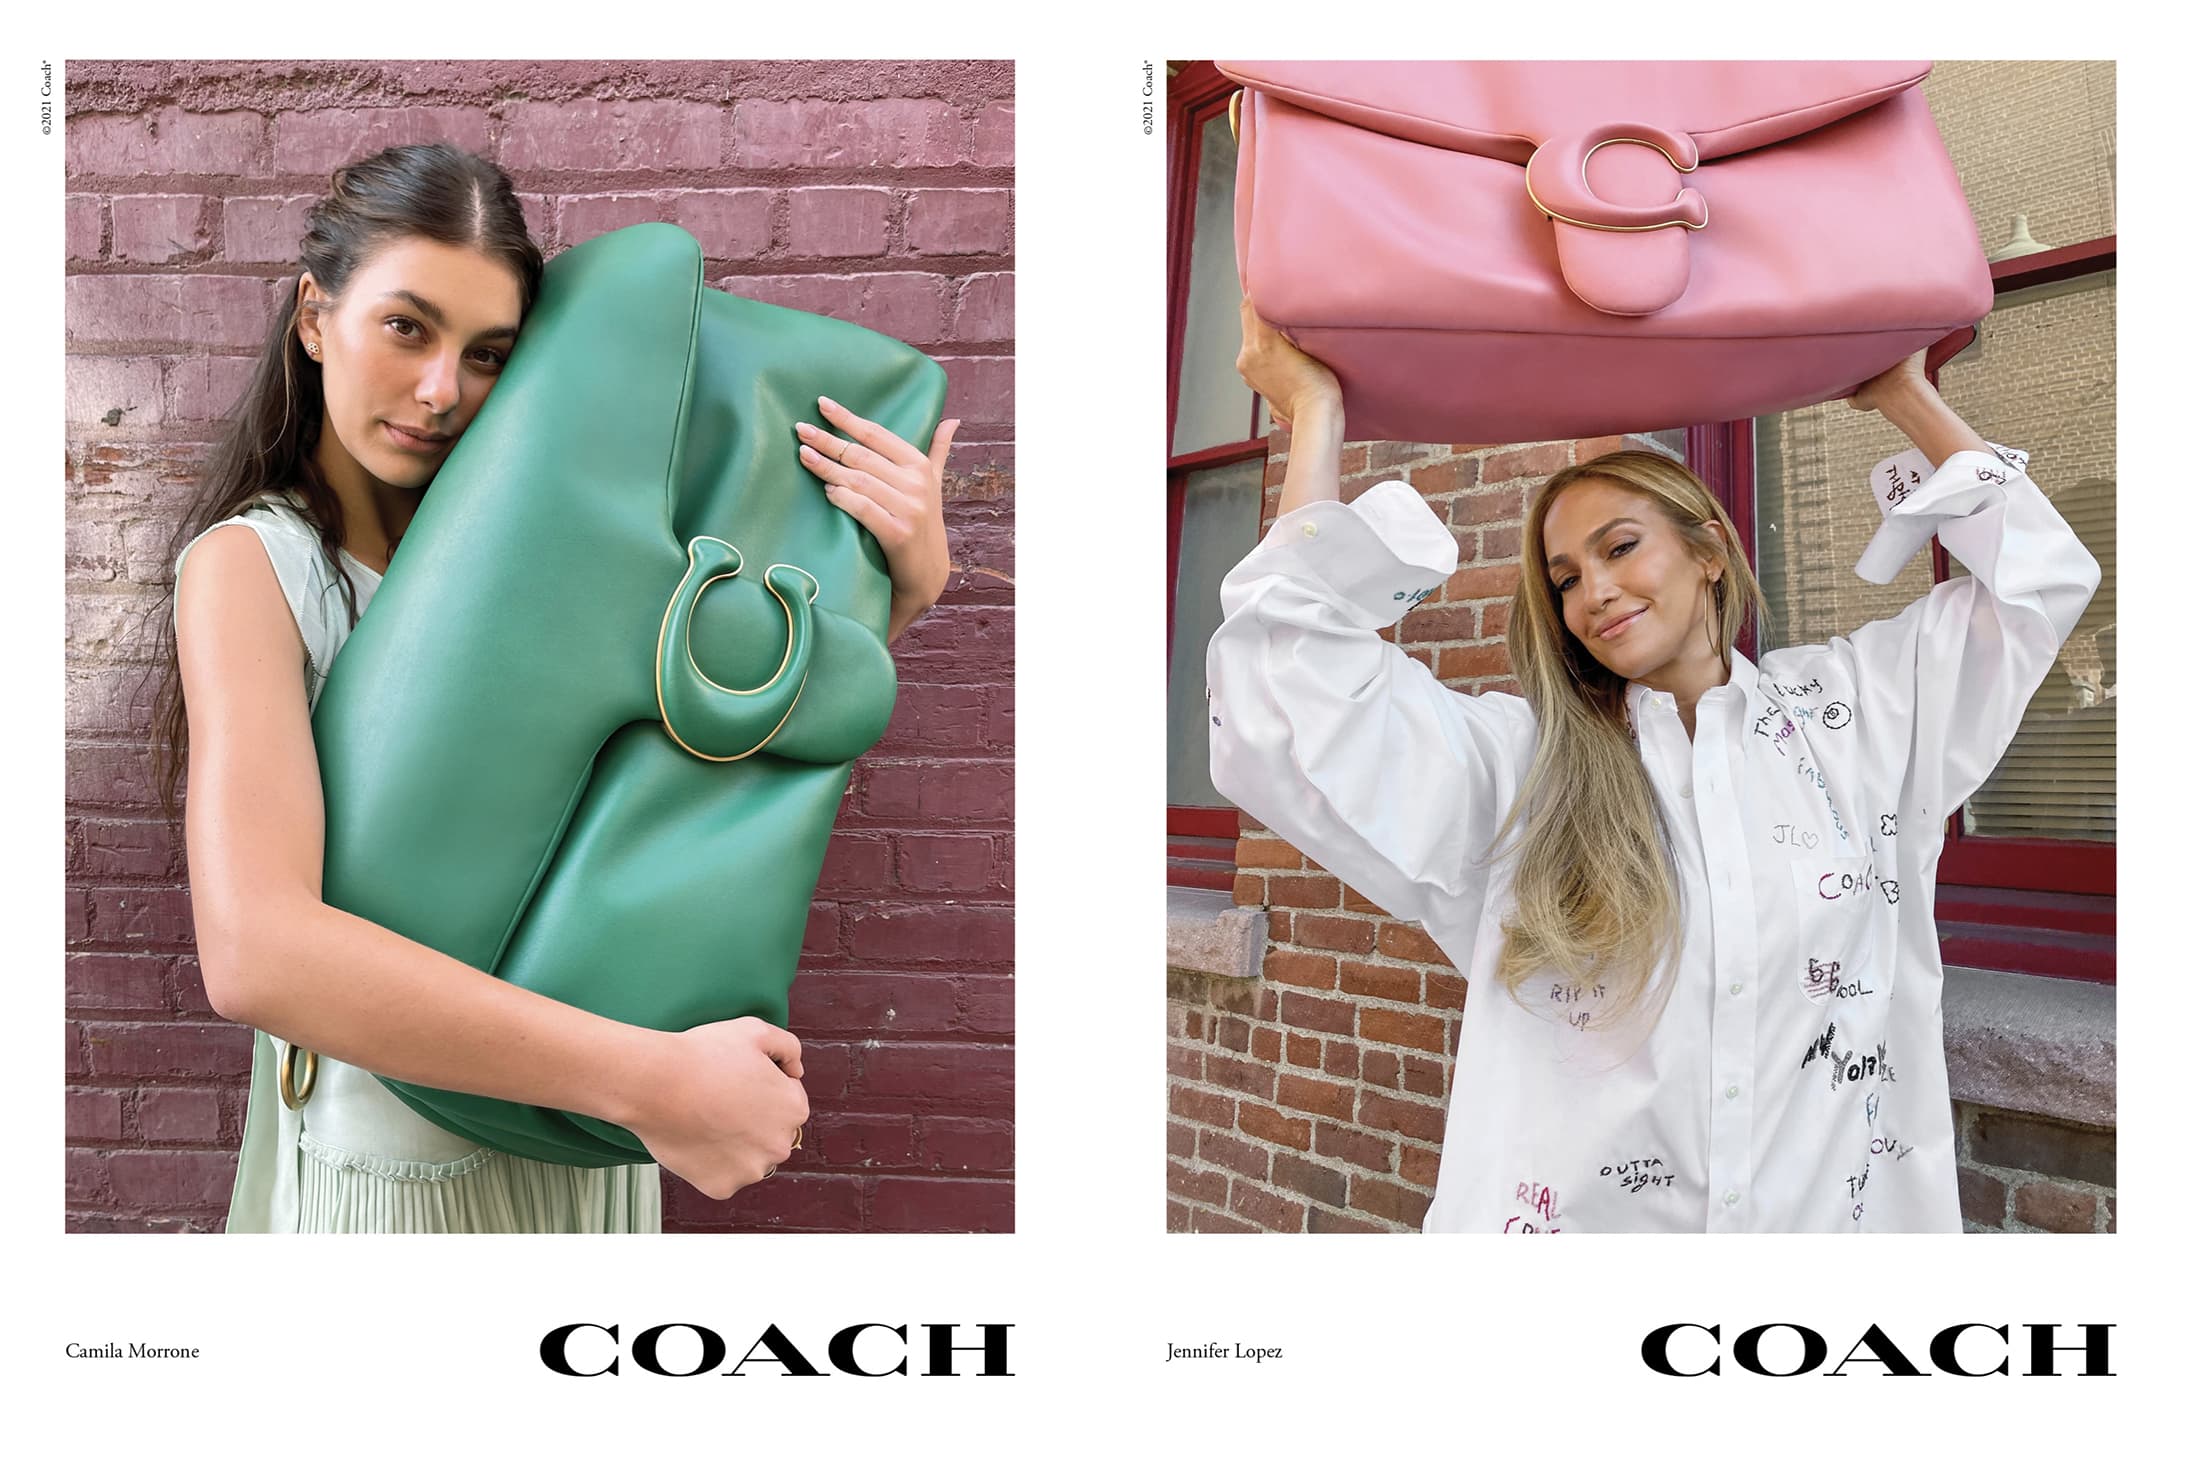 Styling The Coach Tabby Bag, Gallery posted by Em Sheldon